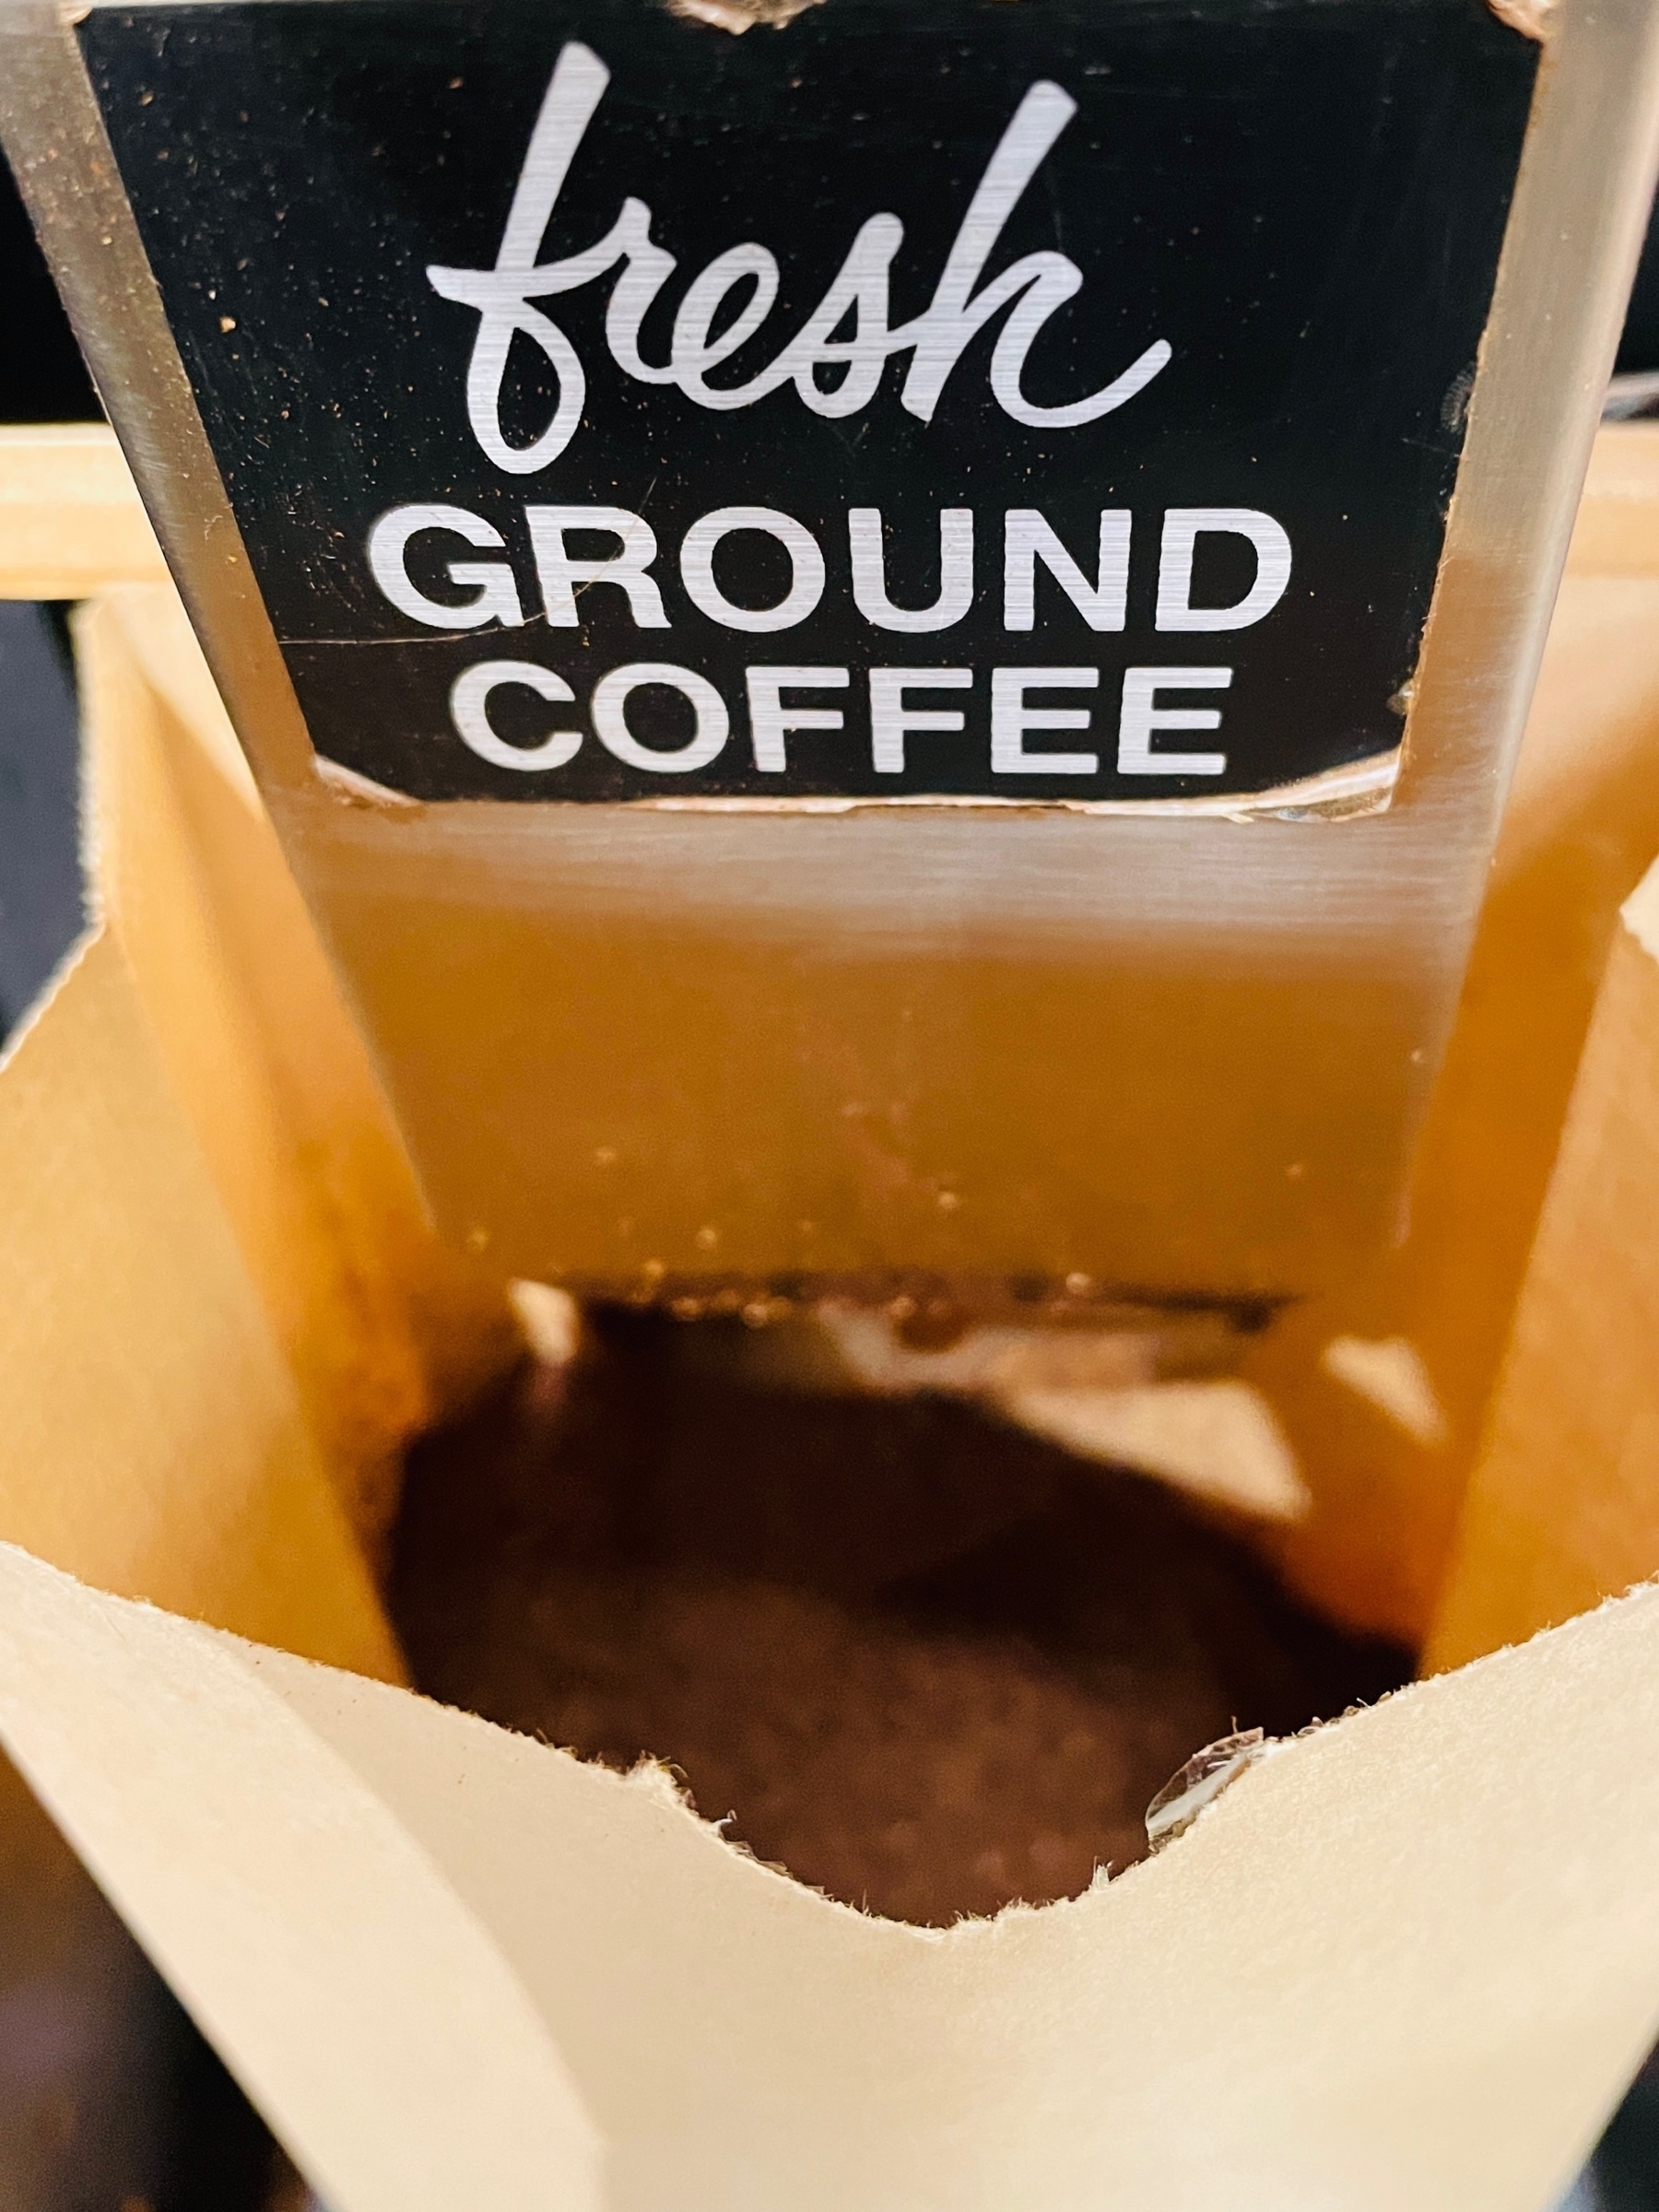 coffee being ground into a paper bag